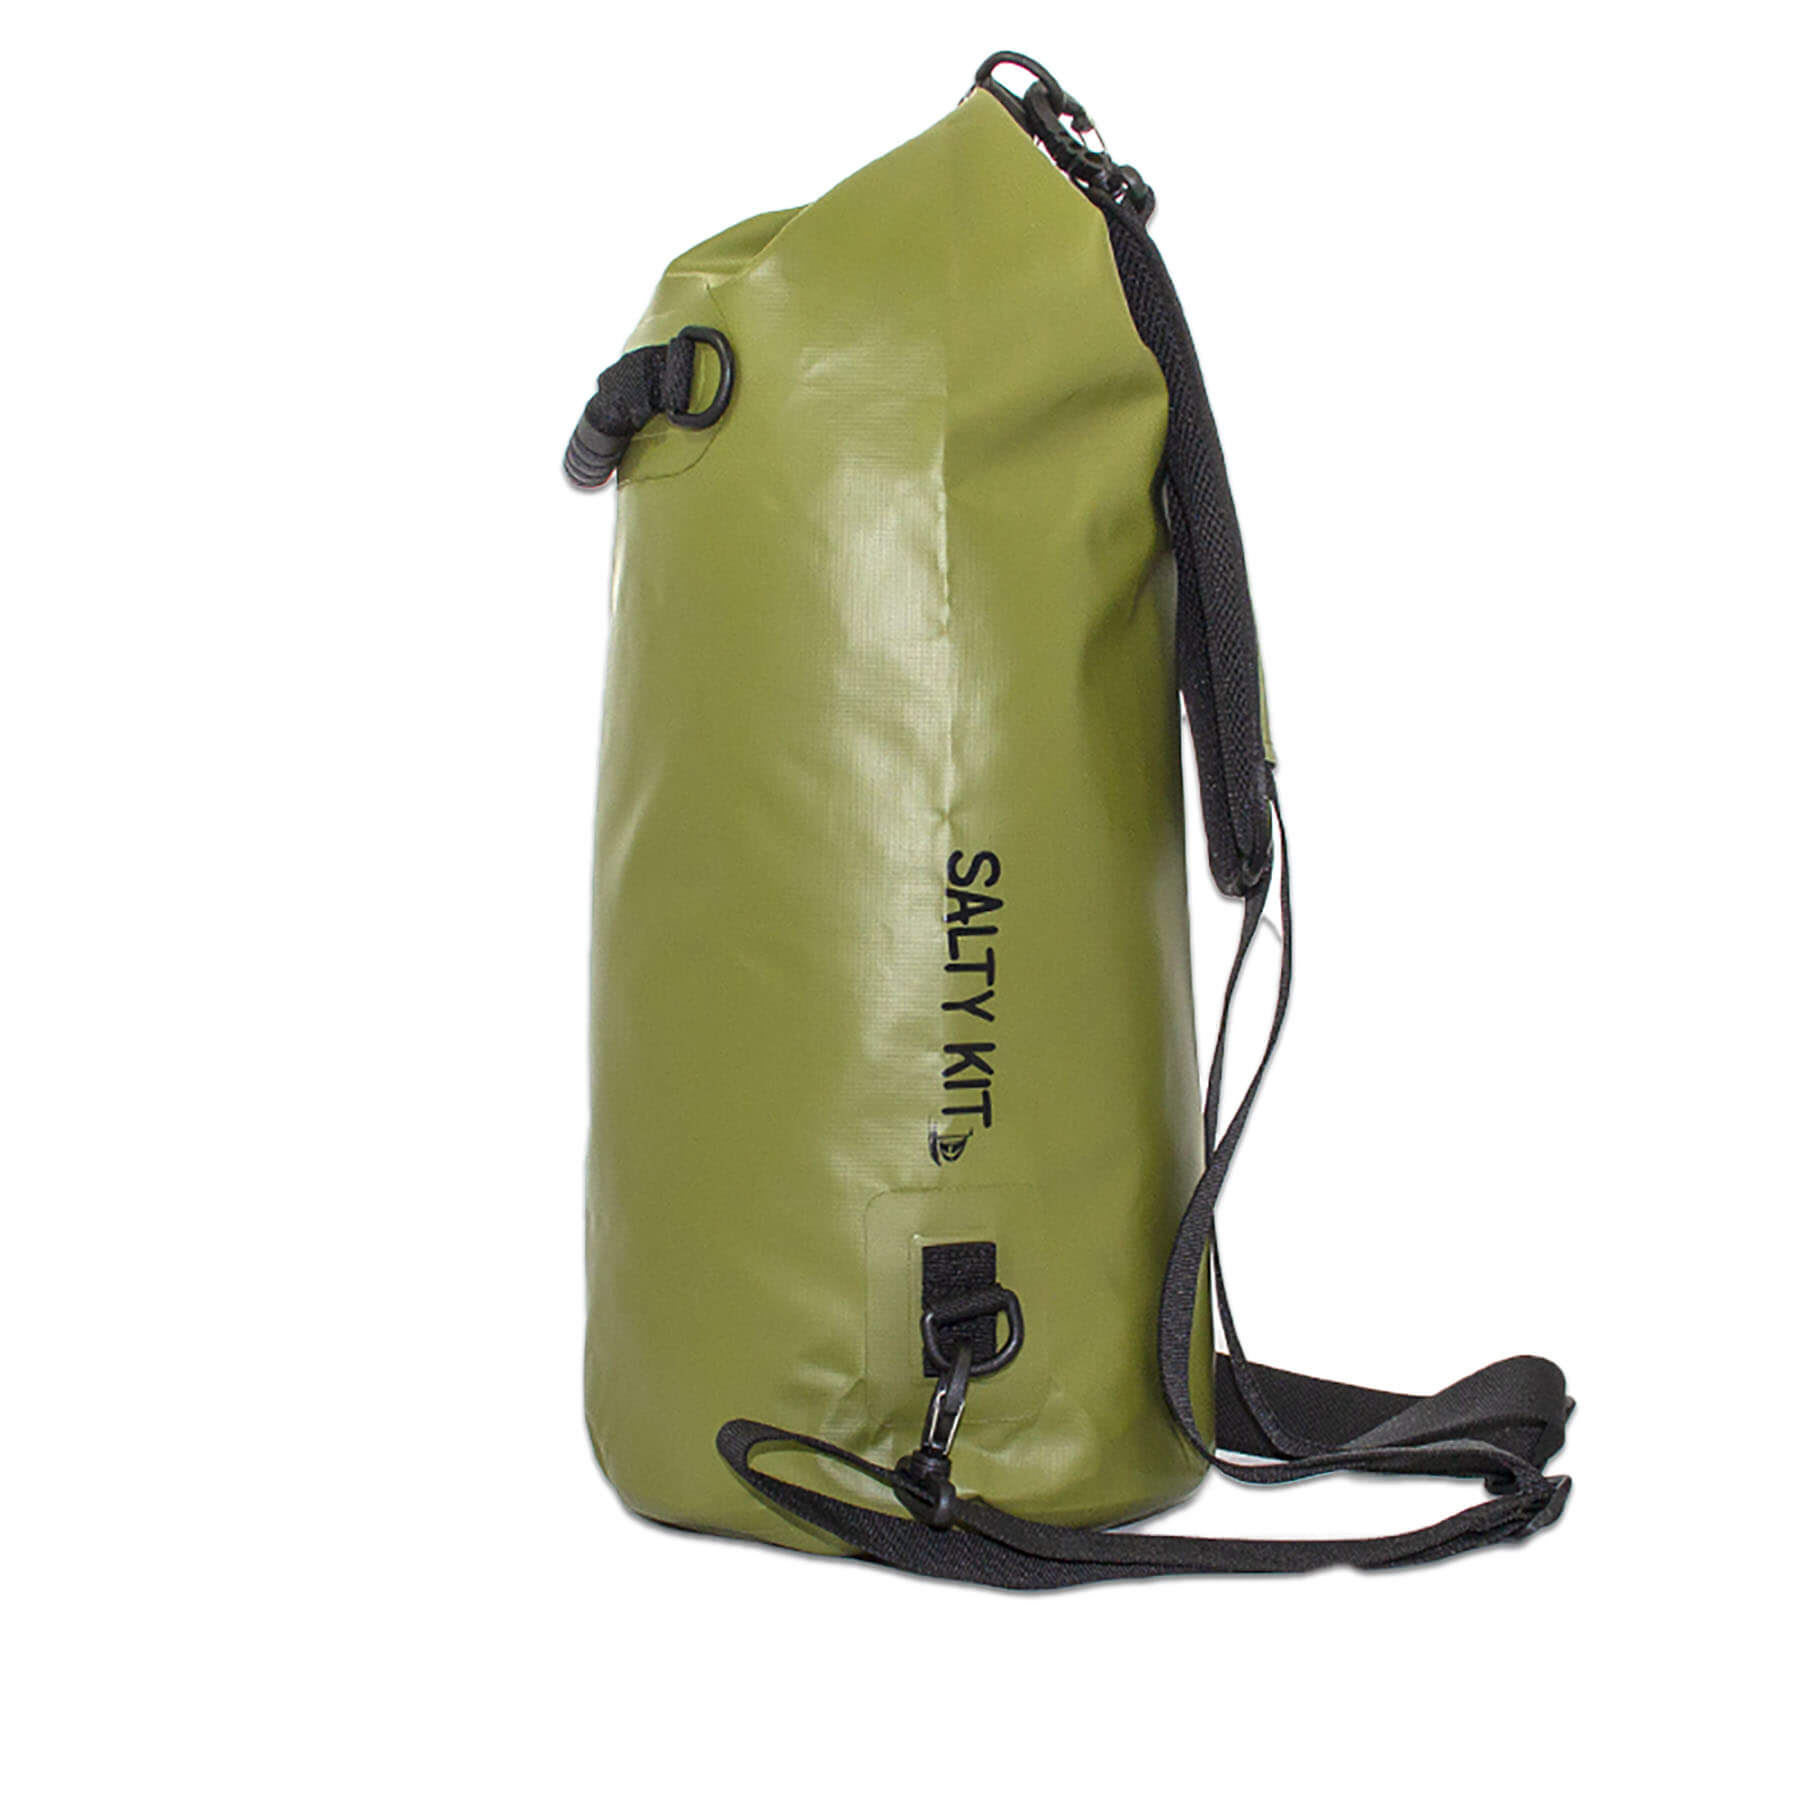 waterproof dry bag 20 litres with detachable comfort straps, D rings and handle in an olive green colour side view